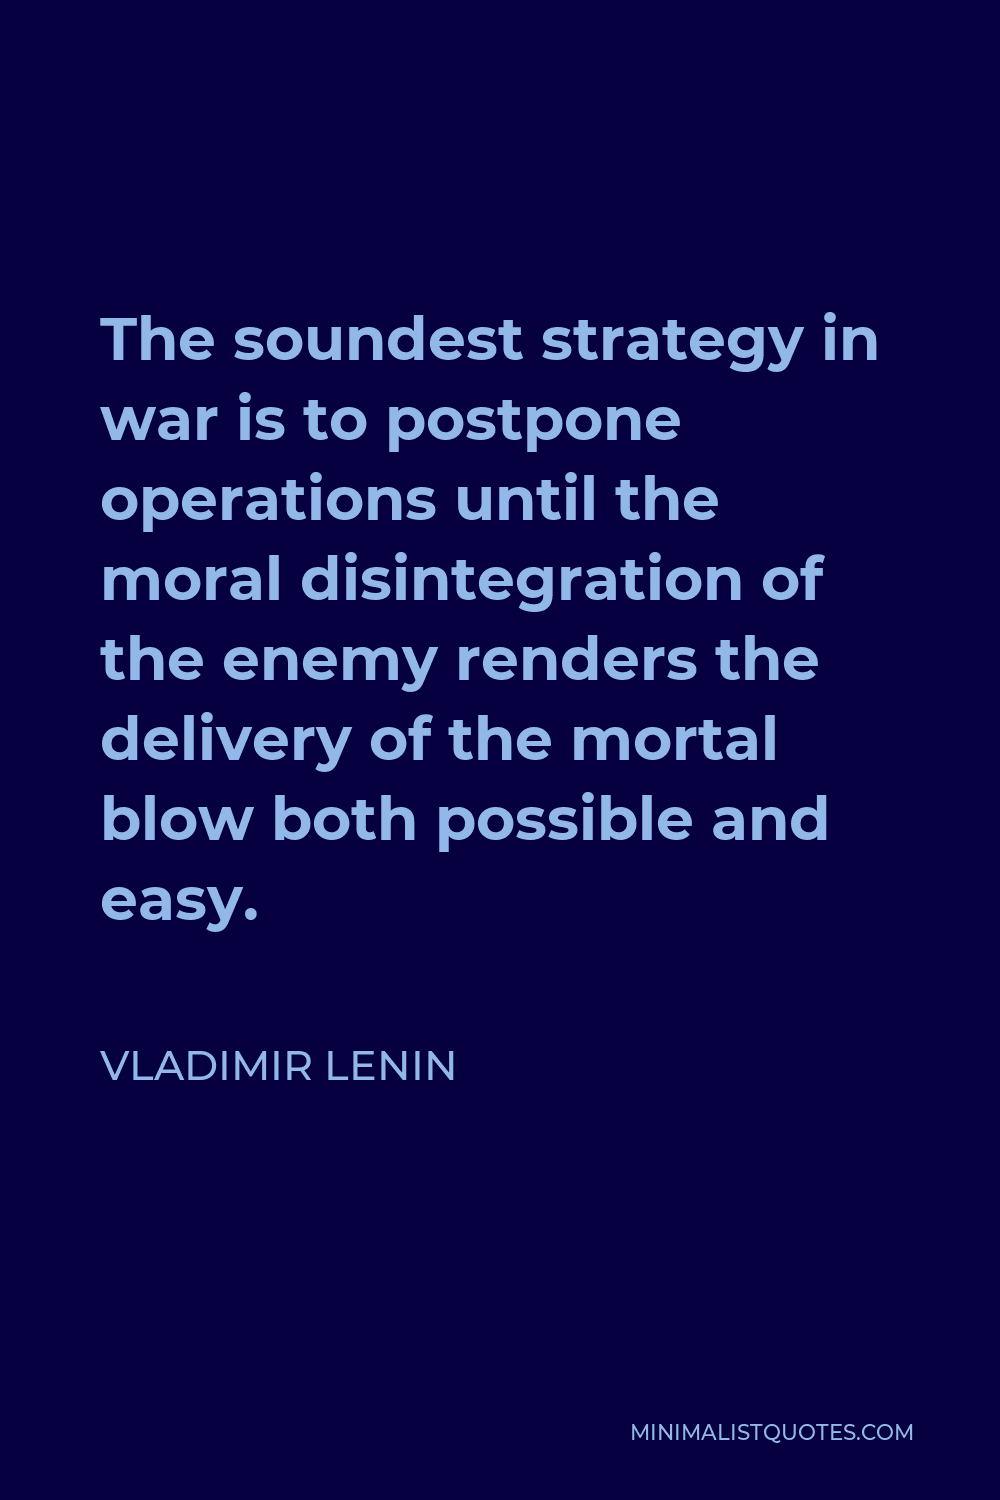 Vladimir Lenin Quote - The soundest strategy in war is to postpone operations until the moral disintegration of the enemy renders the delivery of the mortal blow both possible and easy.